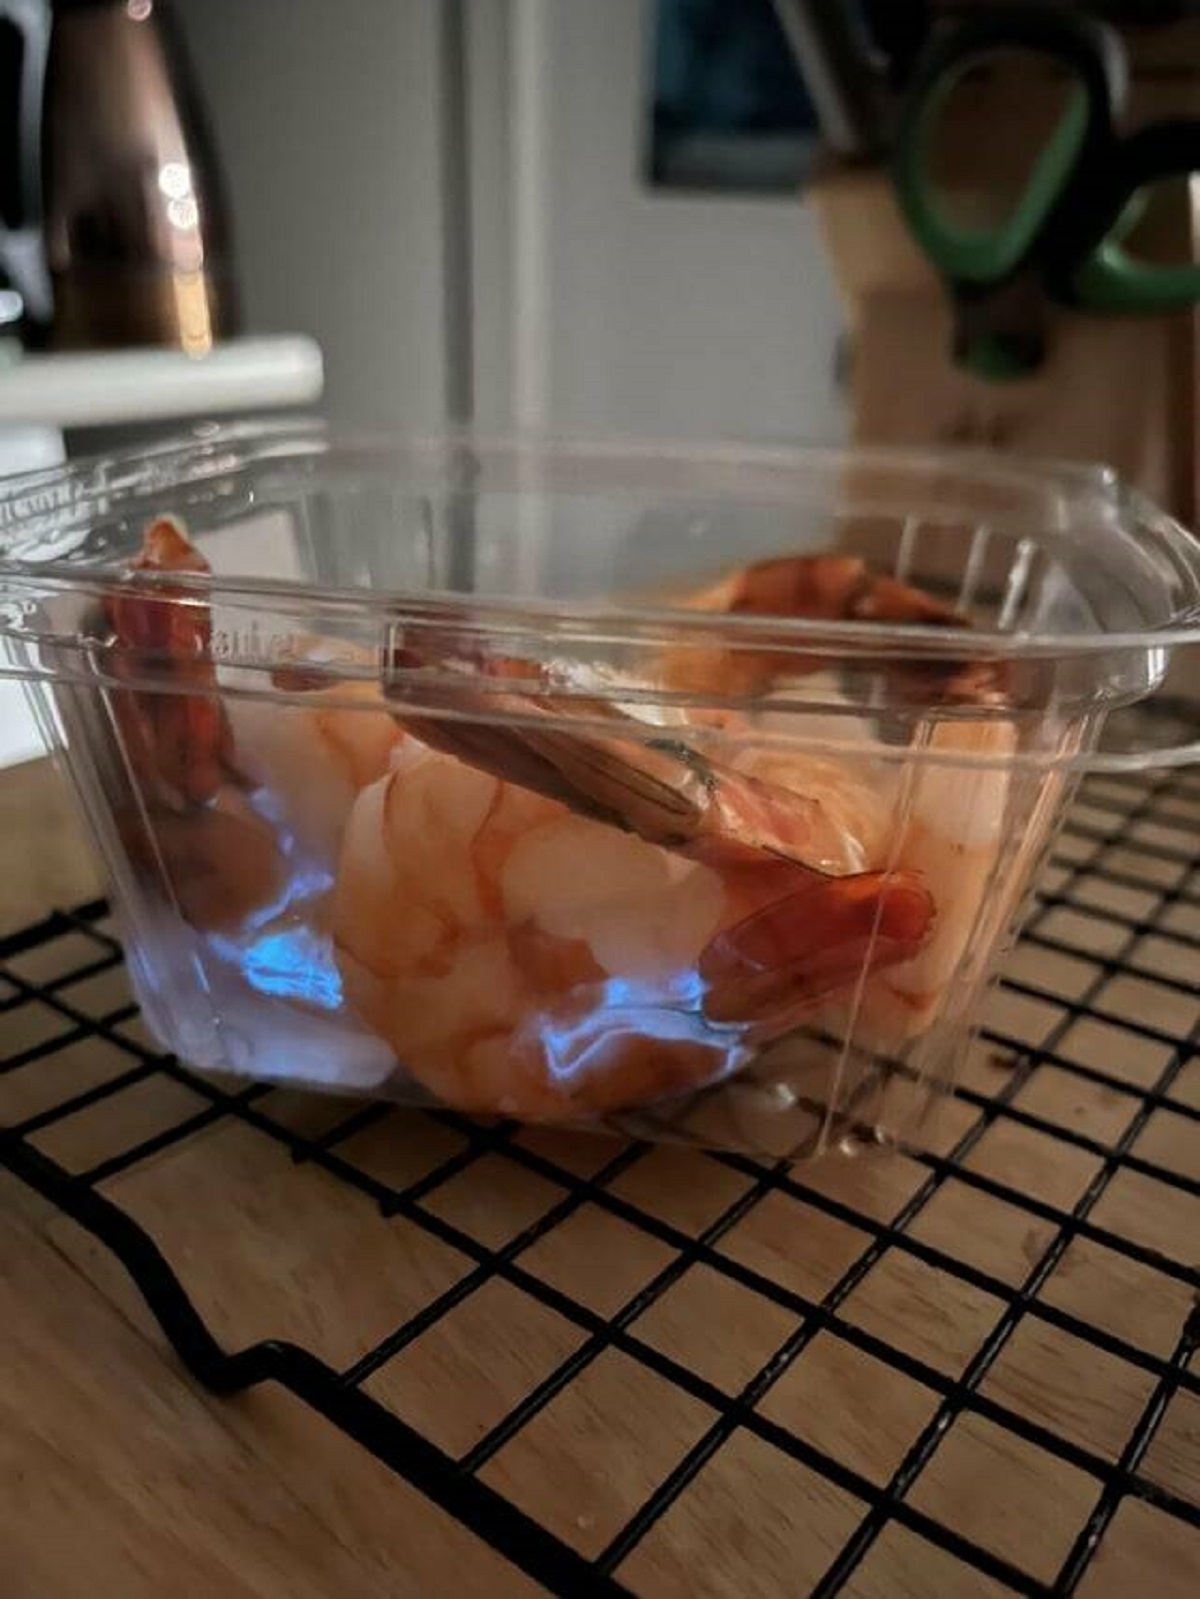 "These cooked shrimp I bought are glowing blue in the dark."